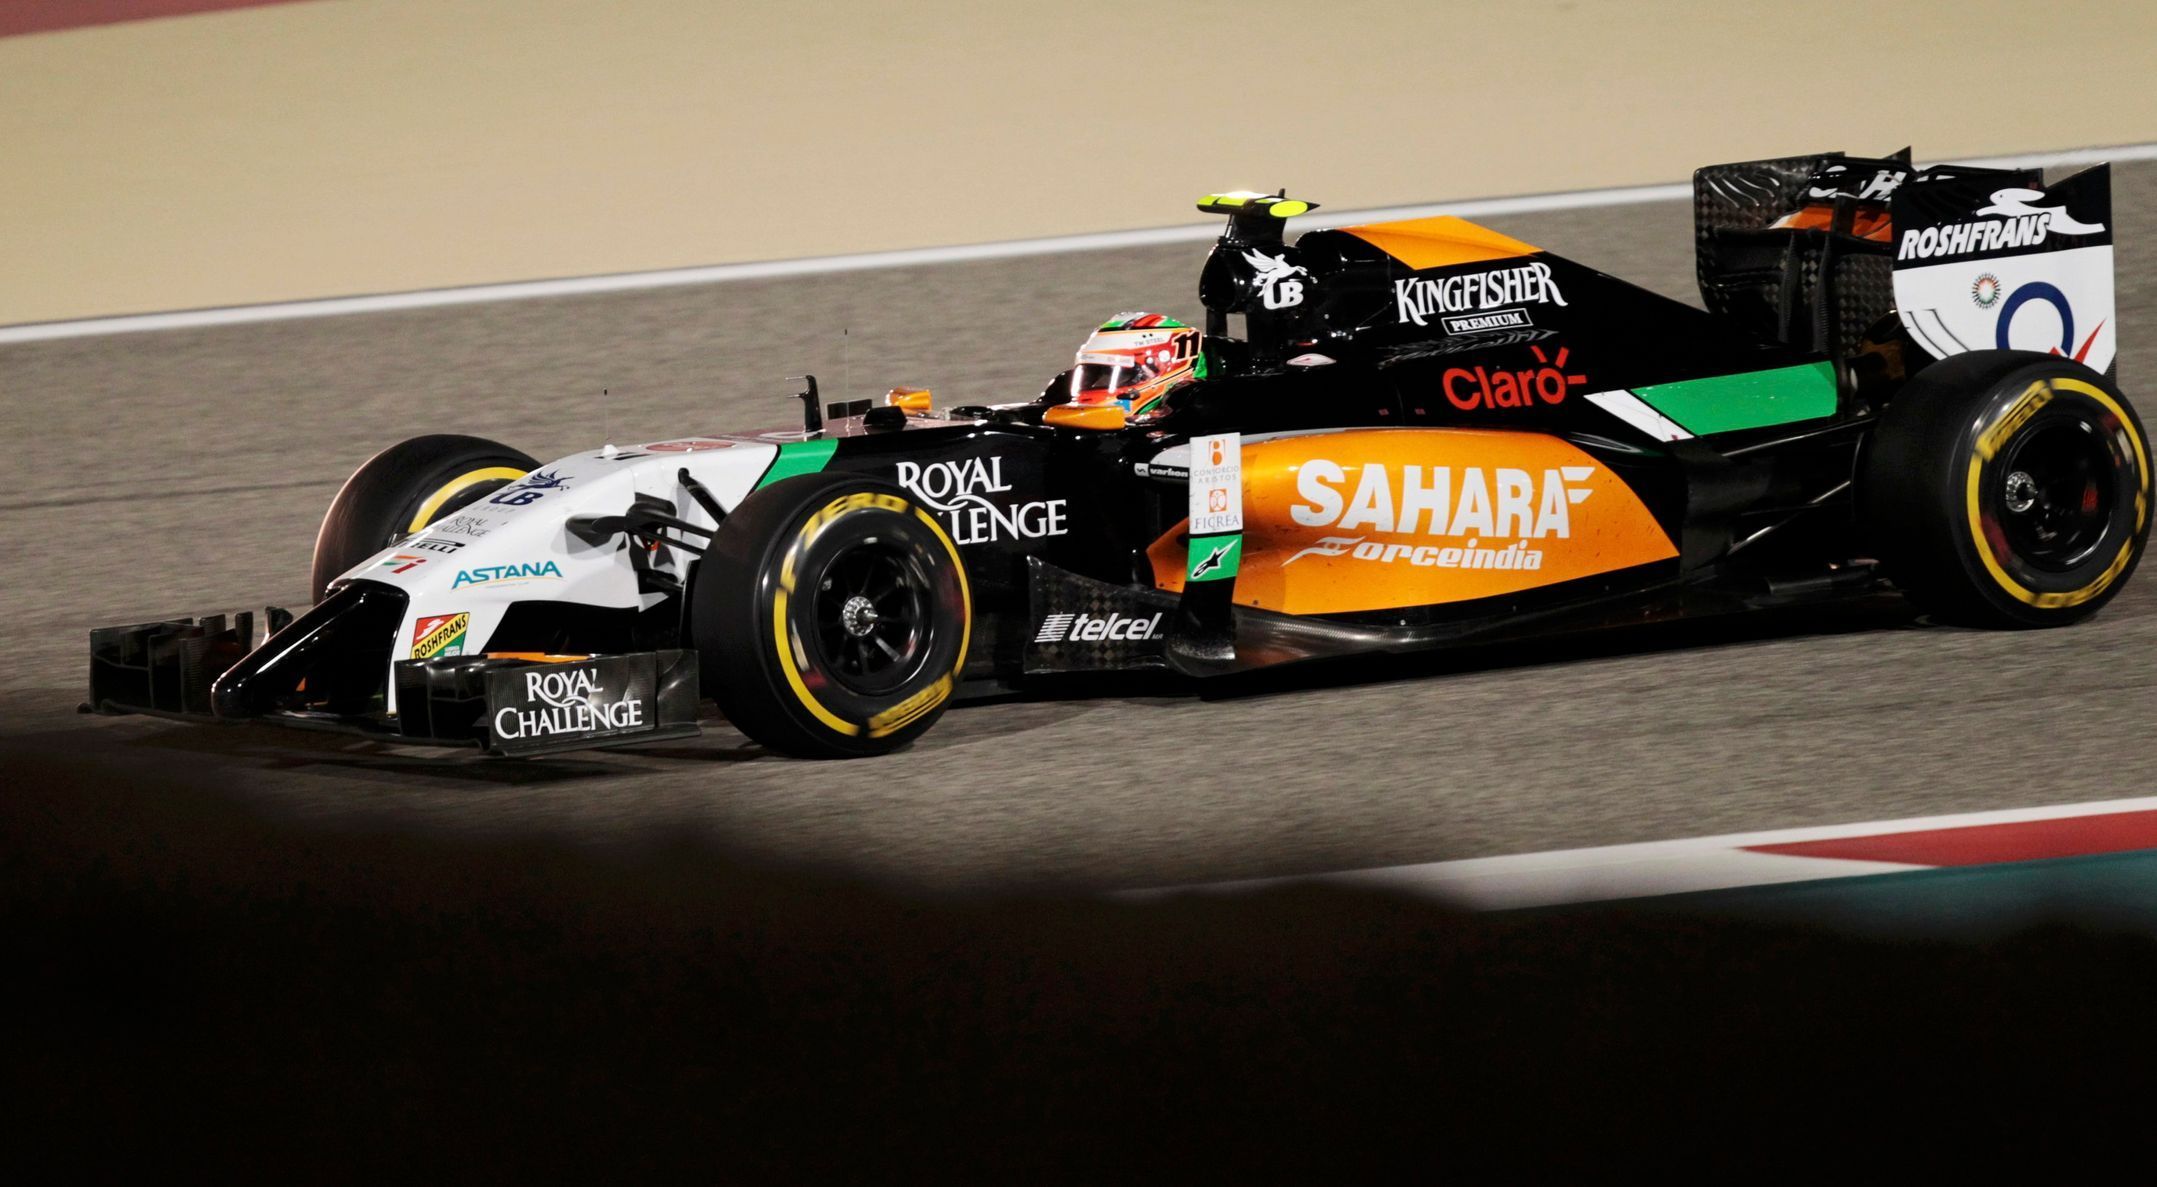 Force India Formula One driver Sergio Perez of Mexico drives during the Bahrain F1 Grand Prix at the Bahrain International Circuit (BIC) in Sakhir